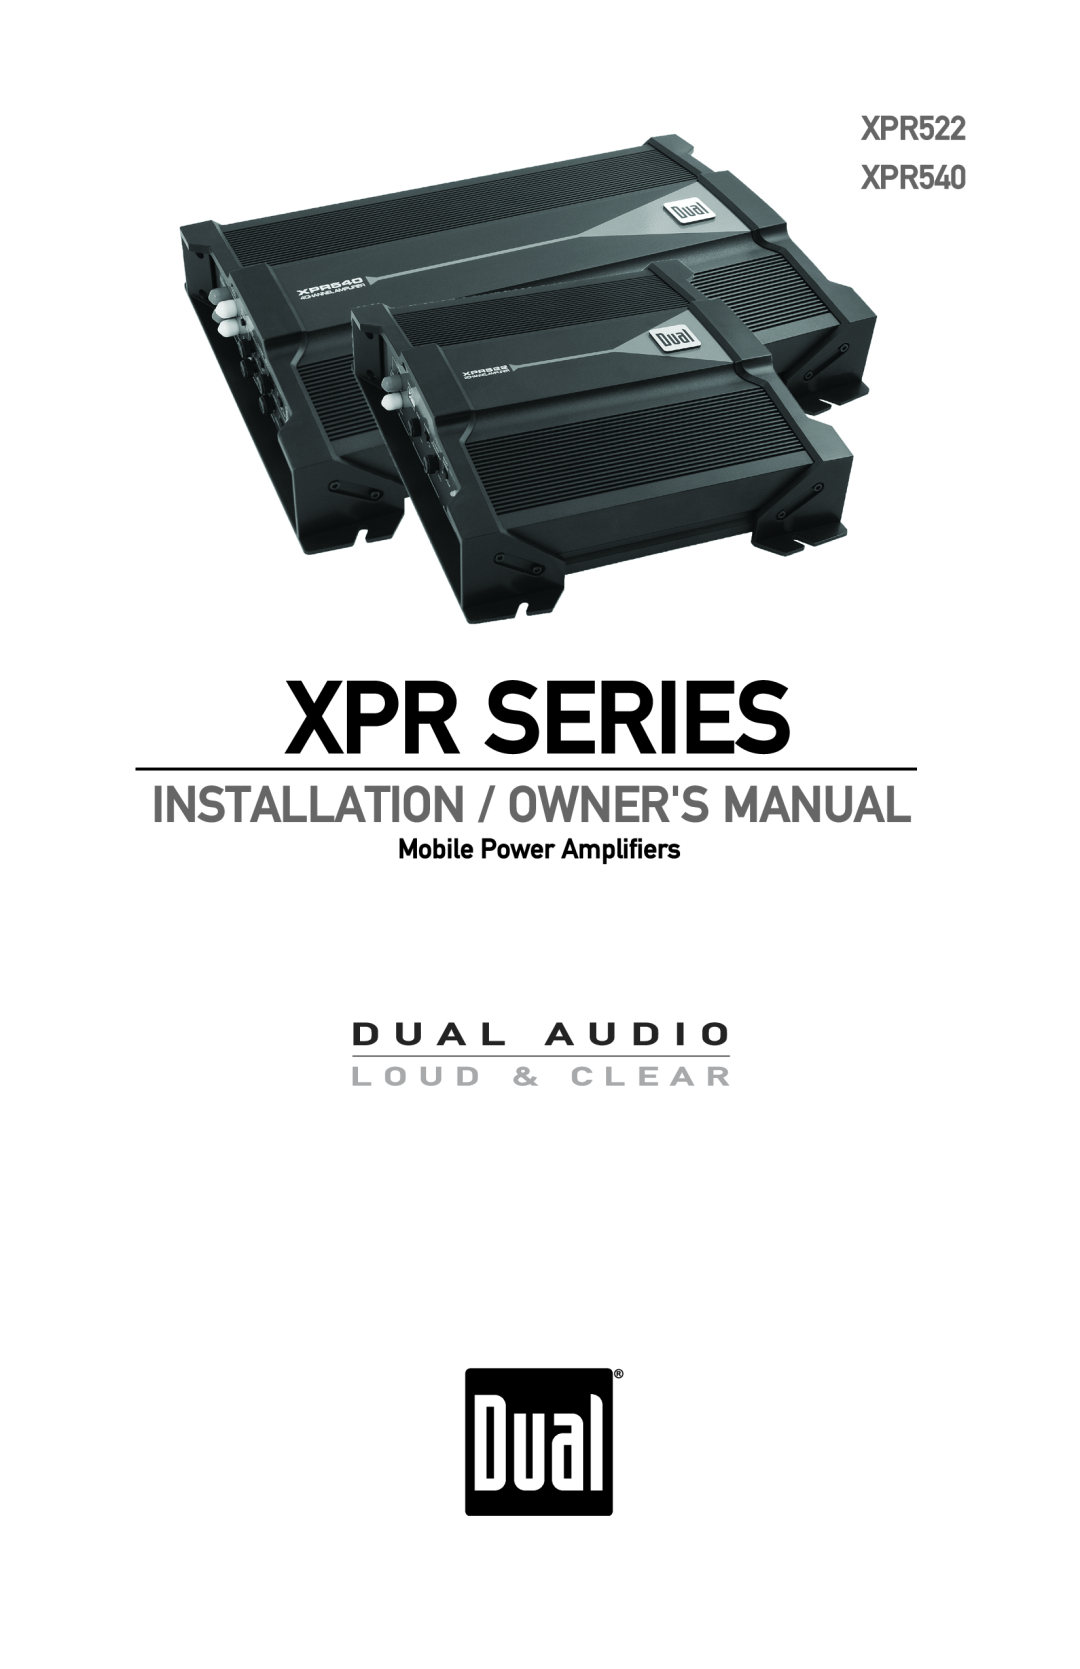 Dual owner manual Mobile Power Amplifiers, Xpr Series, XPR522 XPR540 